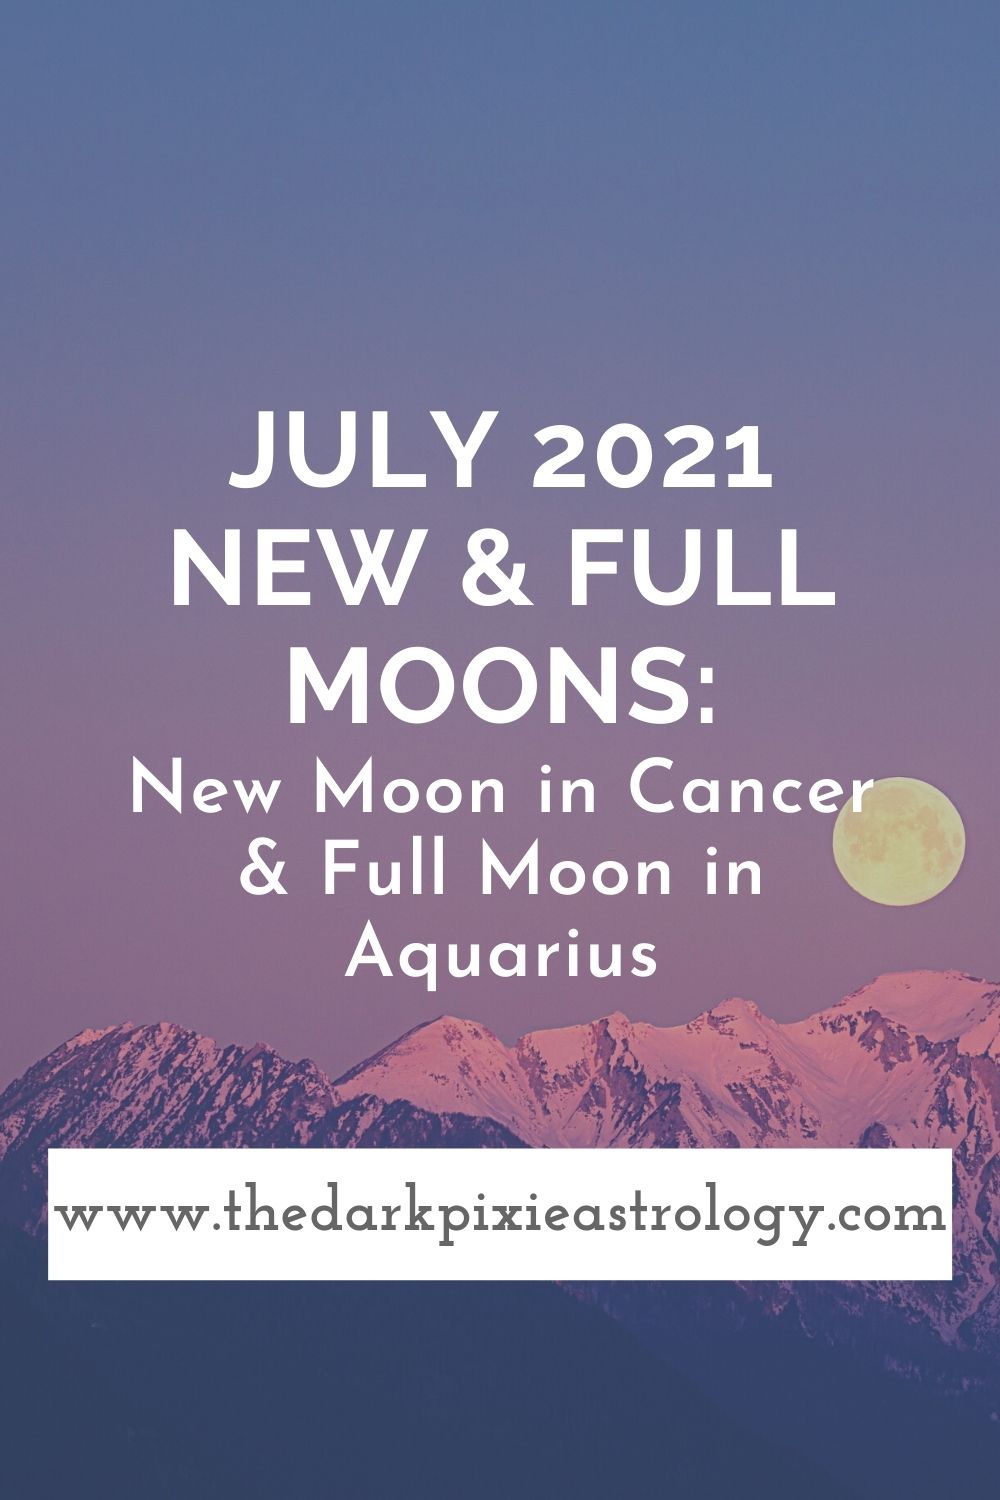 July 2021 New & Full Moons New Moon in Cancer & Full Moon in Aquarius